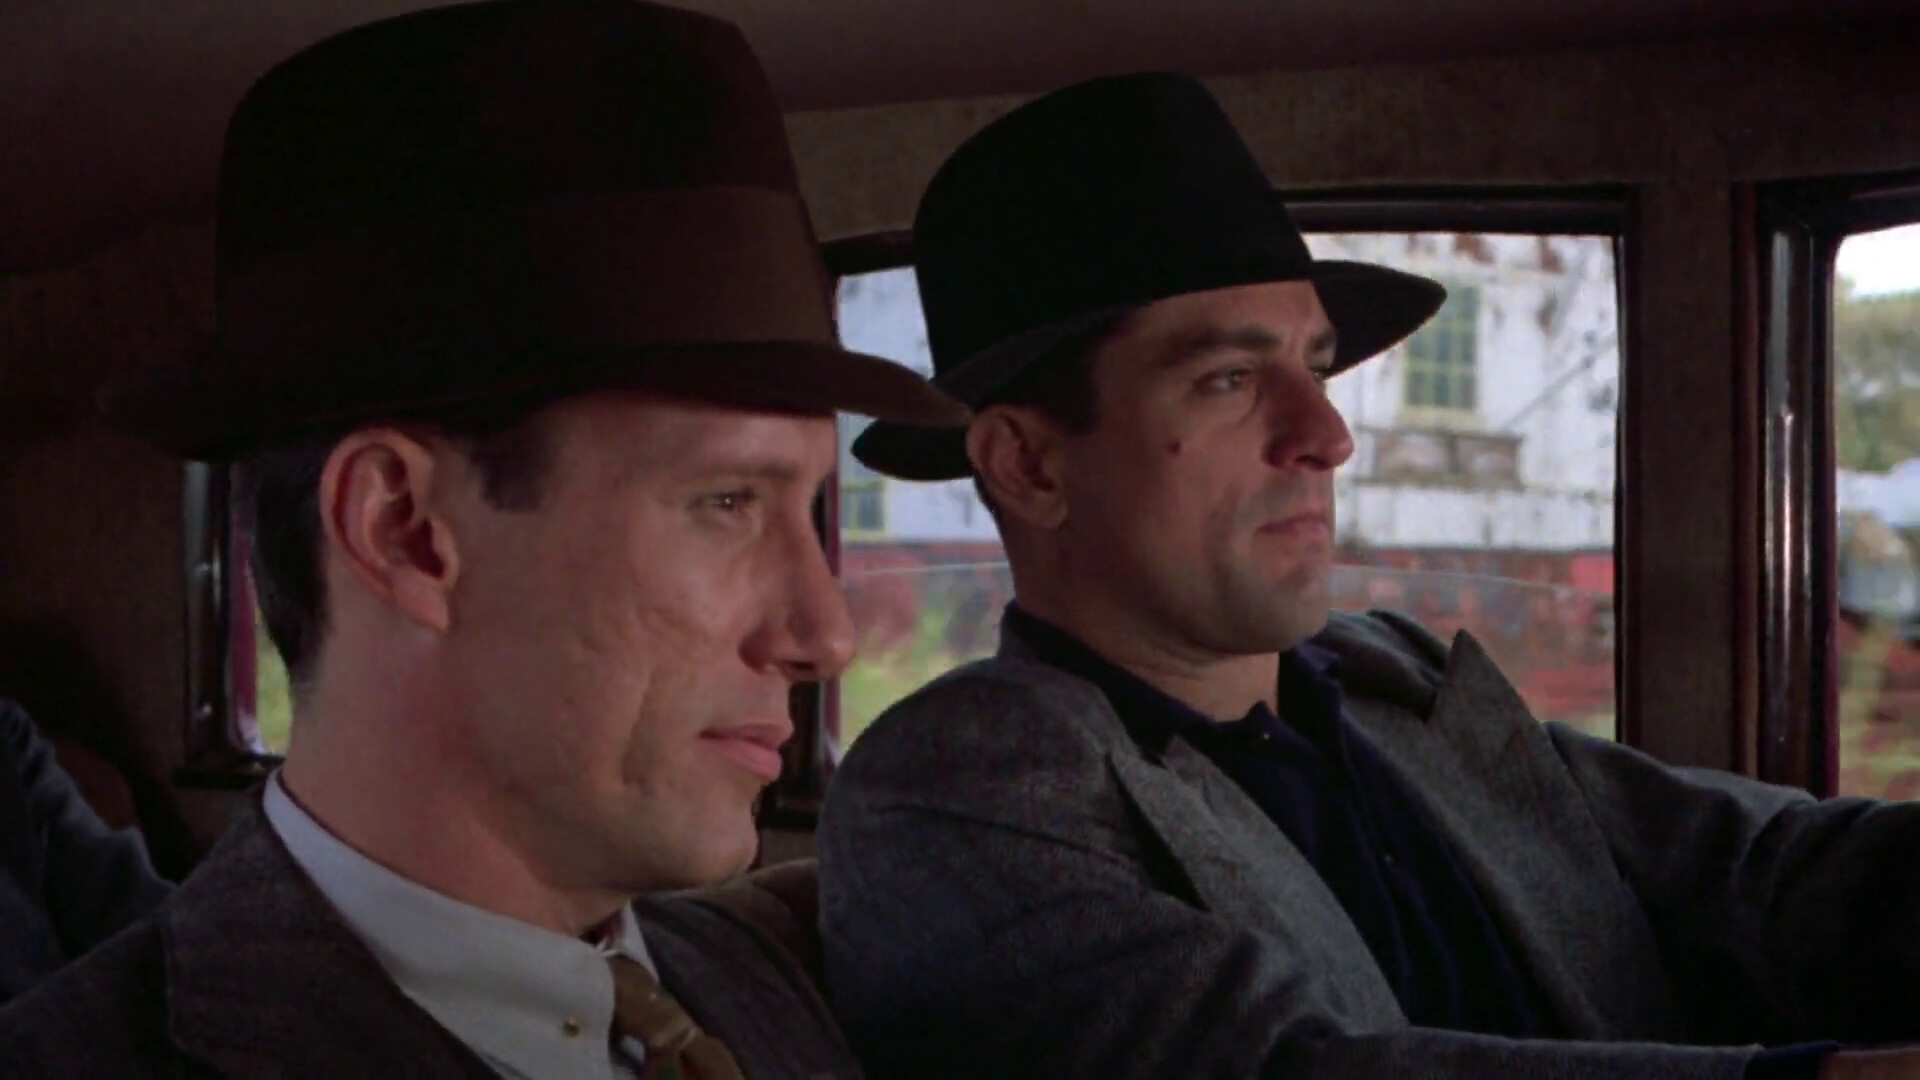 Once Upon a Time in America: Robert De Niro and James Woods as Noodles and Max. 1920x1080 Full HD Background.